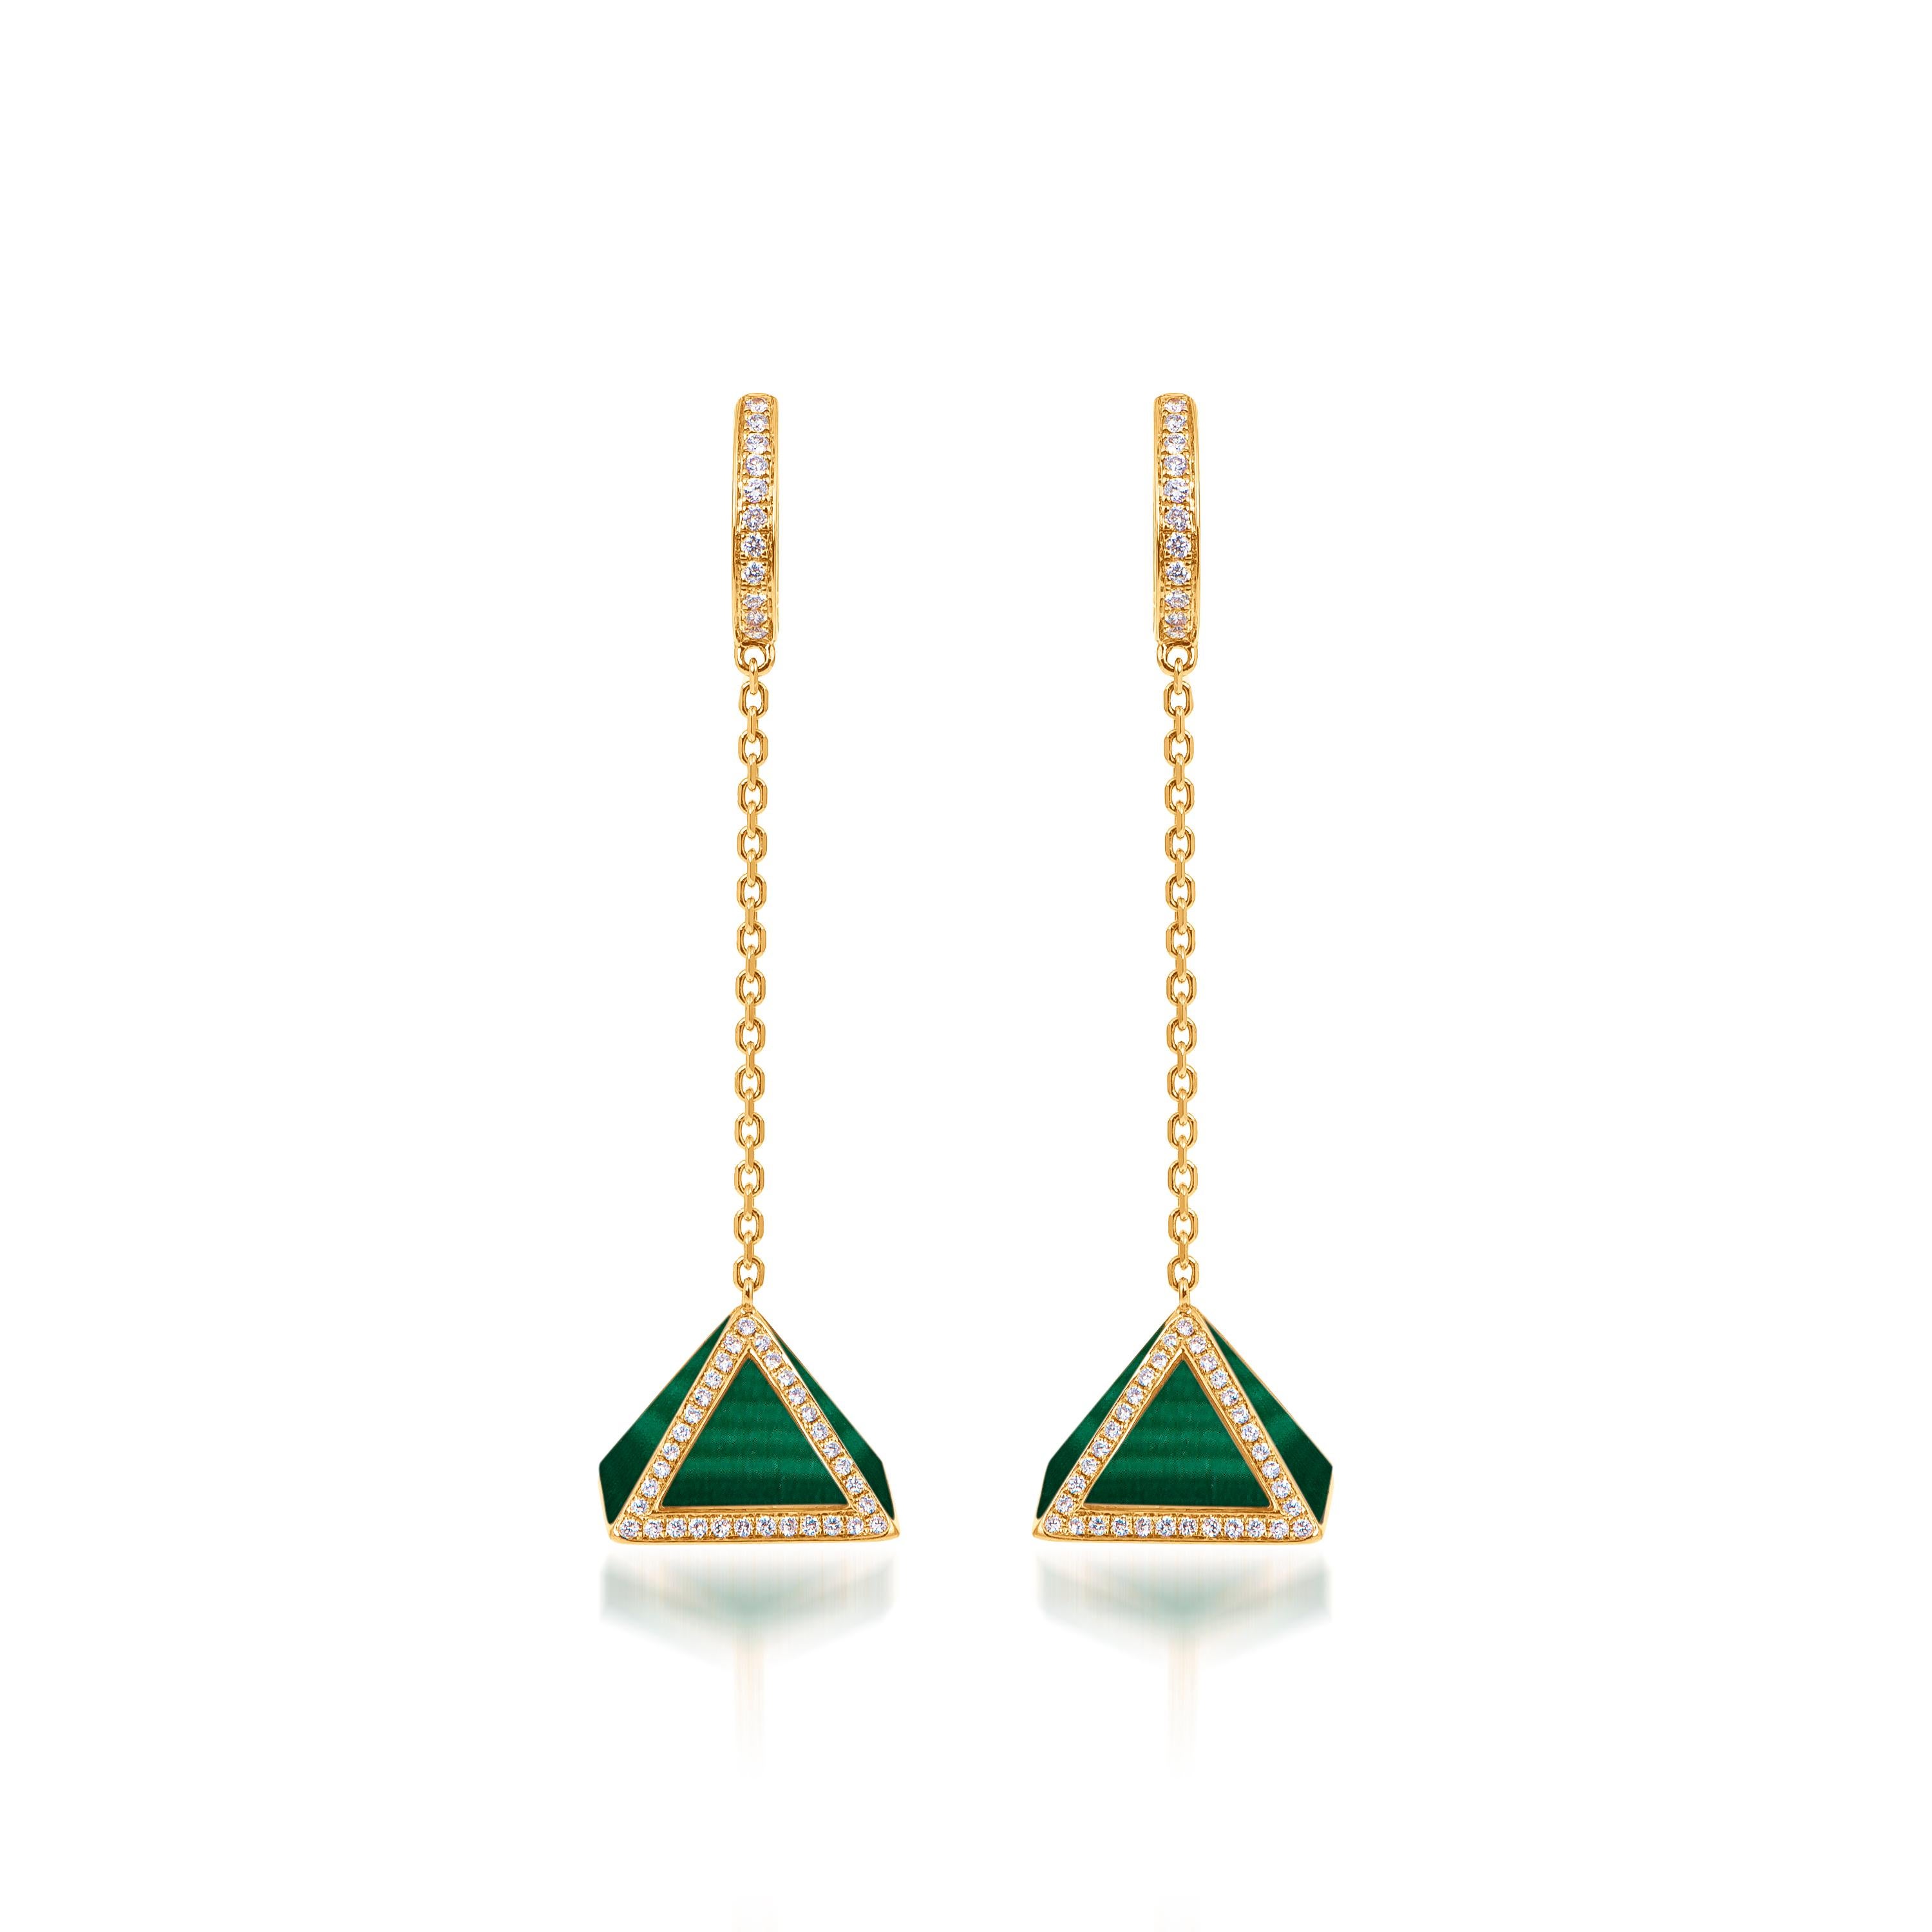 Brilliant Cut Tetra Tribus Earrings with Malachite and Diamonds in 18K Yellow Gold For Sale